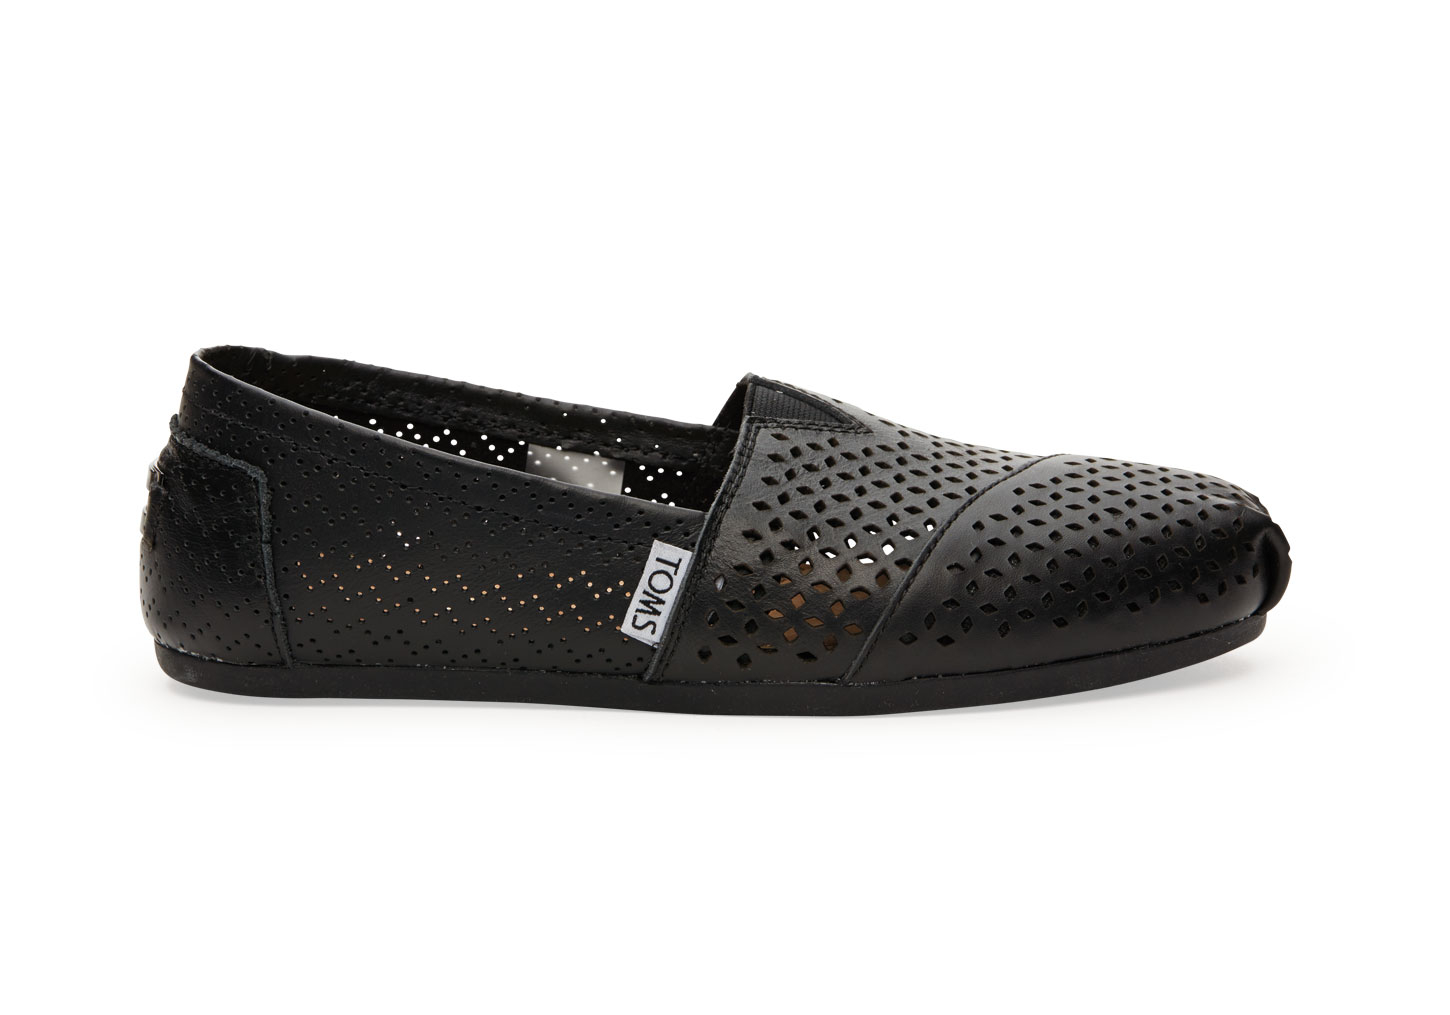 TOMS Black Leather Perforated Women's 